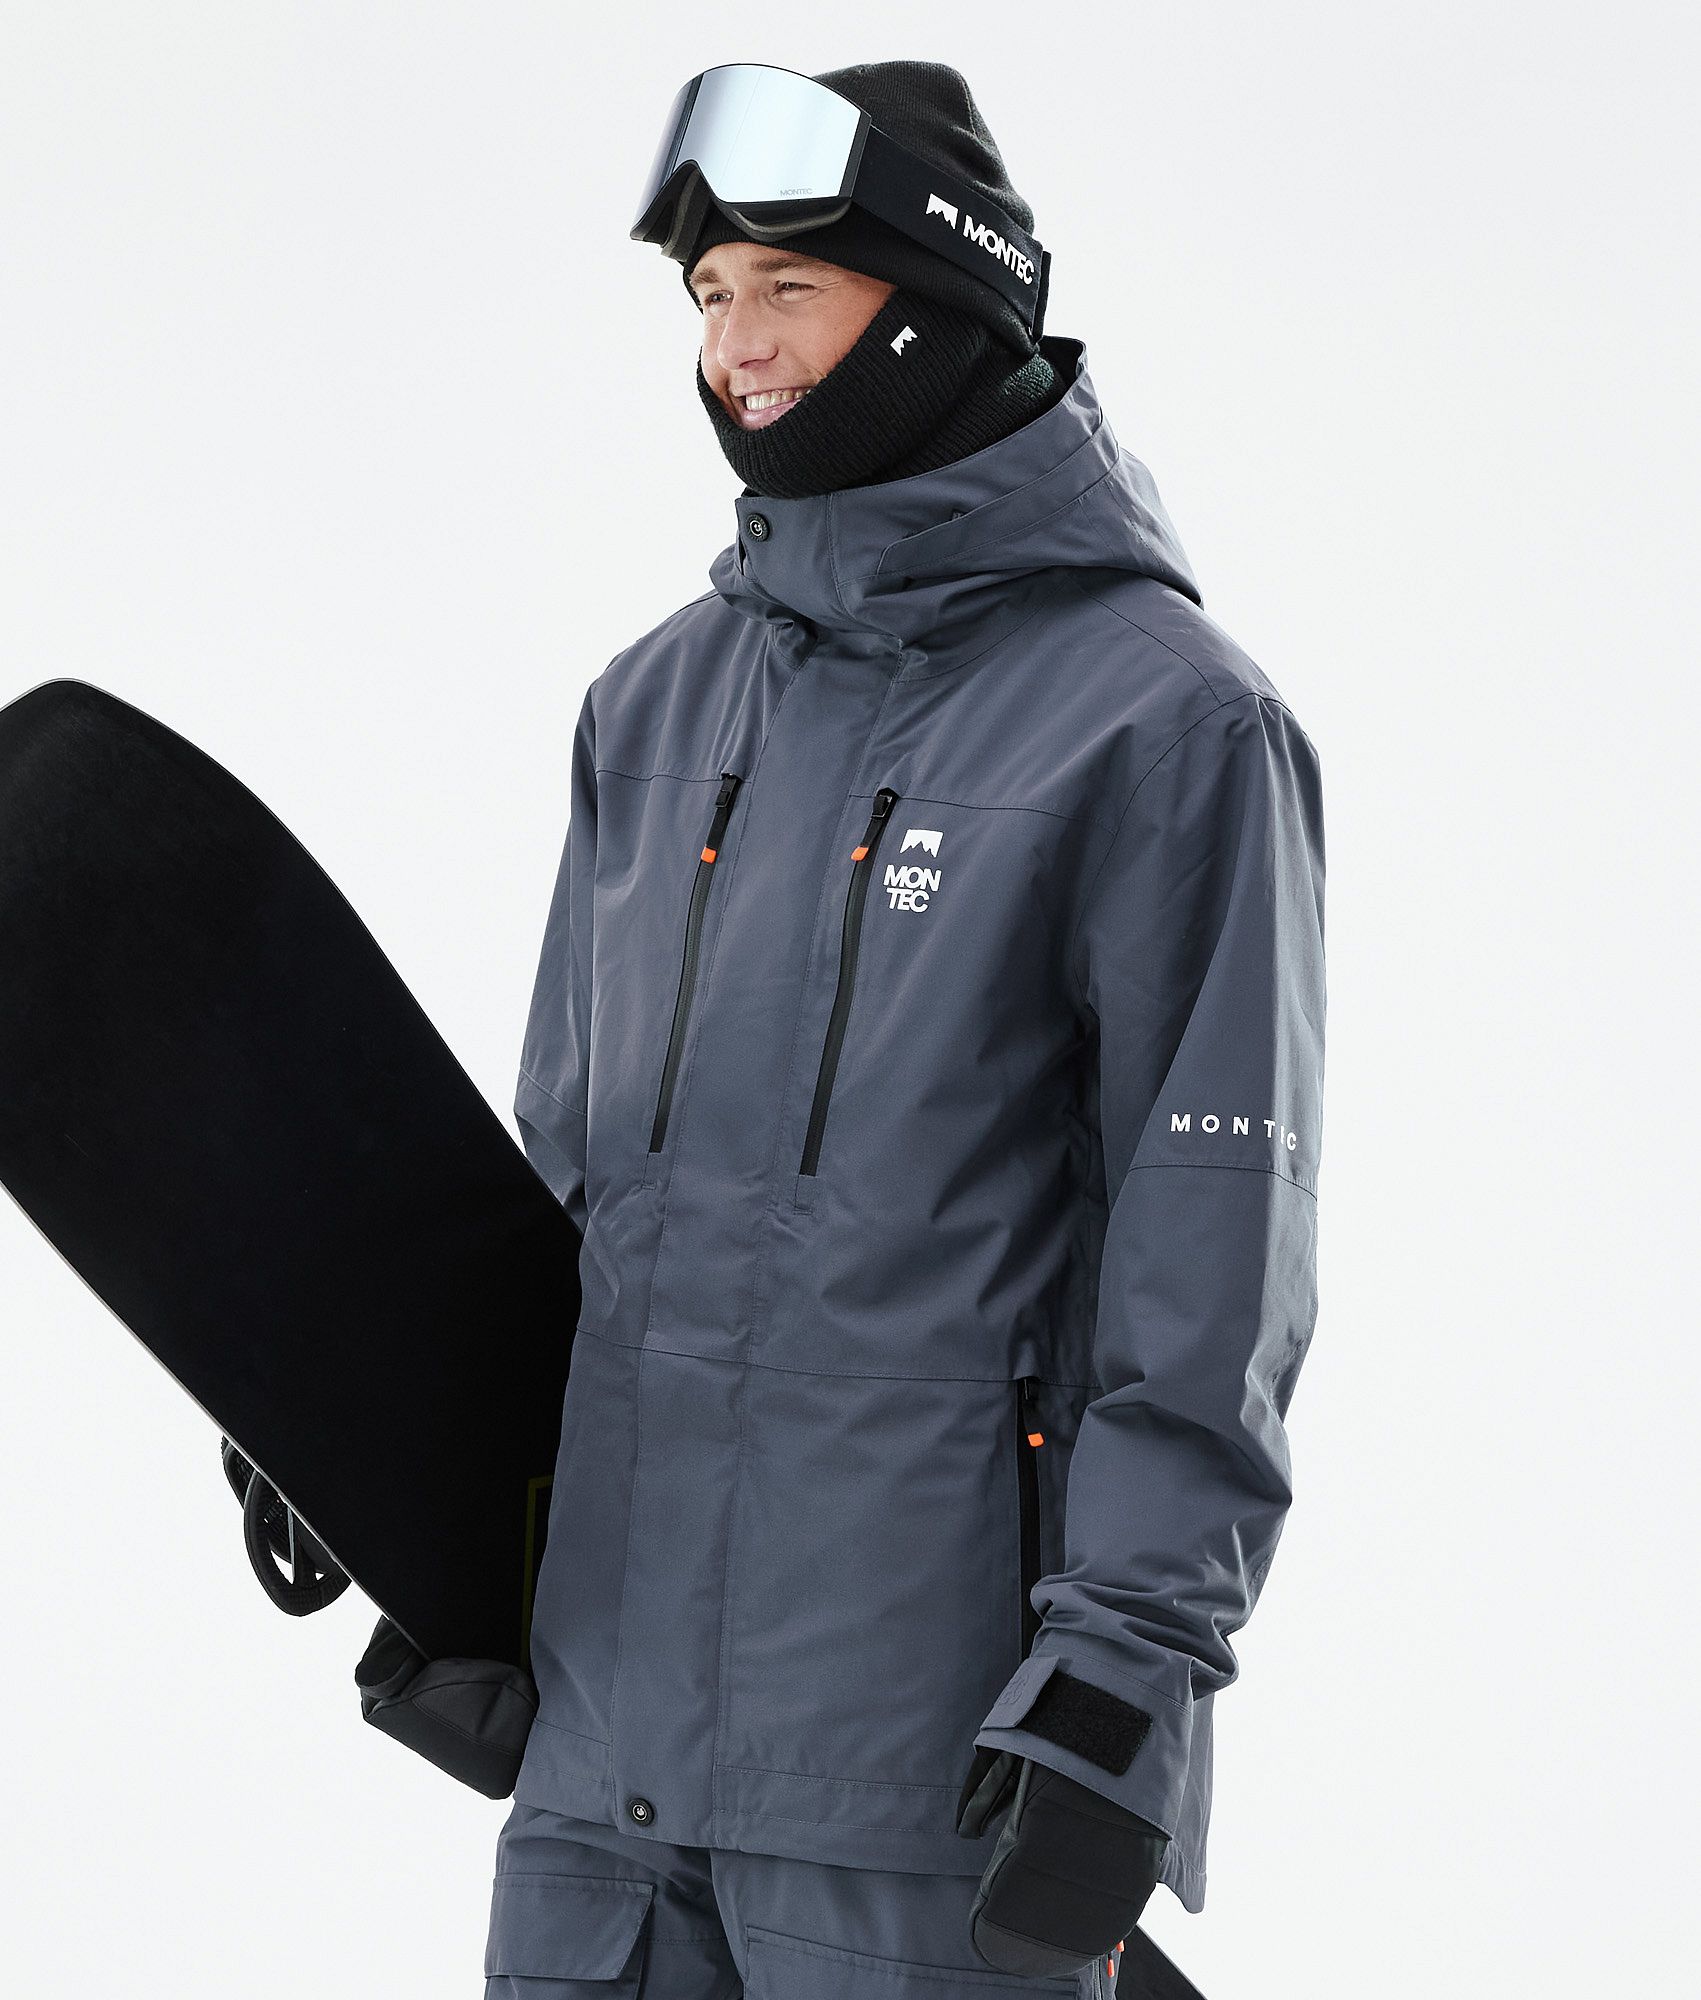 snowboard clothing online